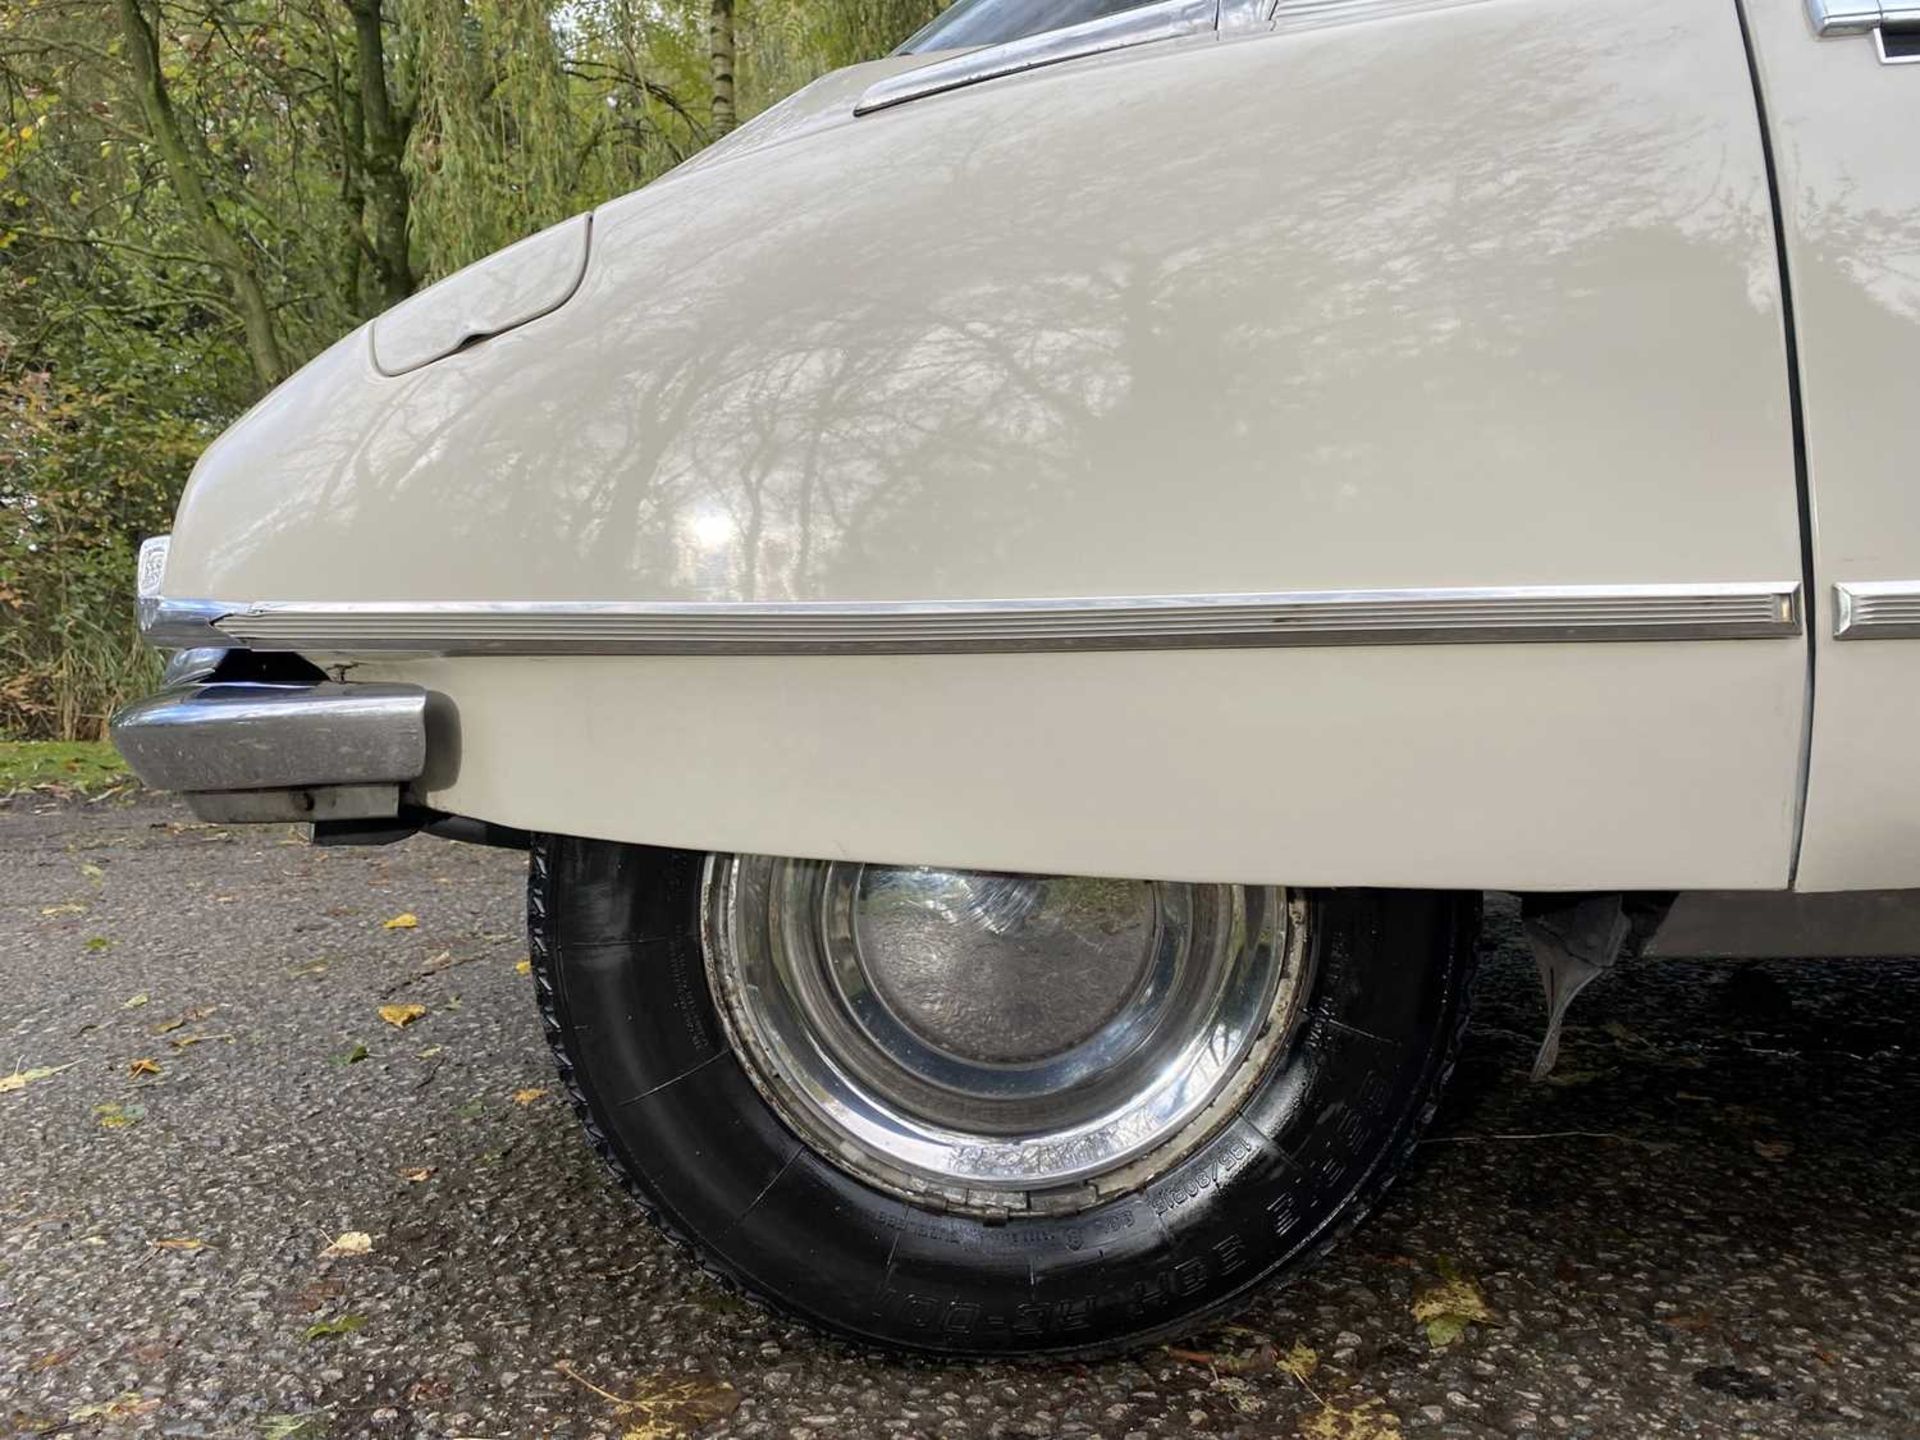 1971 Citroën DS21 Recently completed a 2,000 mile European grand tour - Image 78 of 100